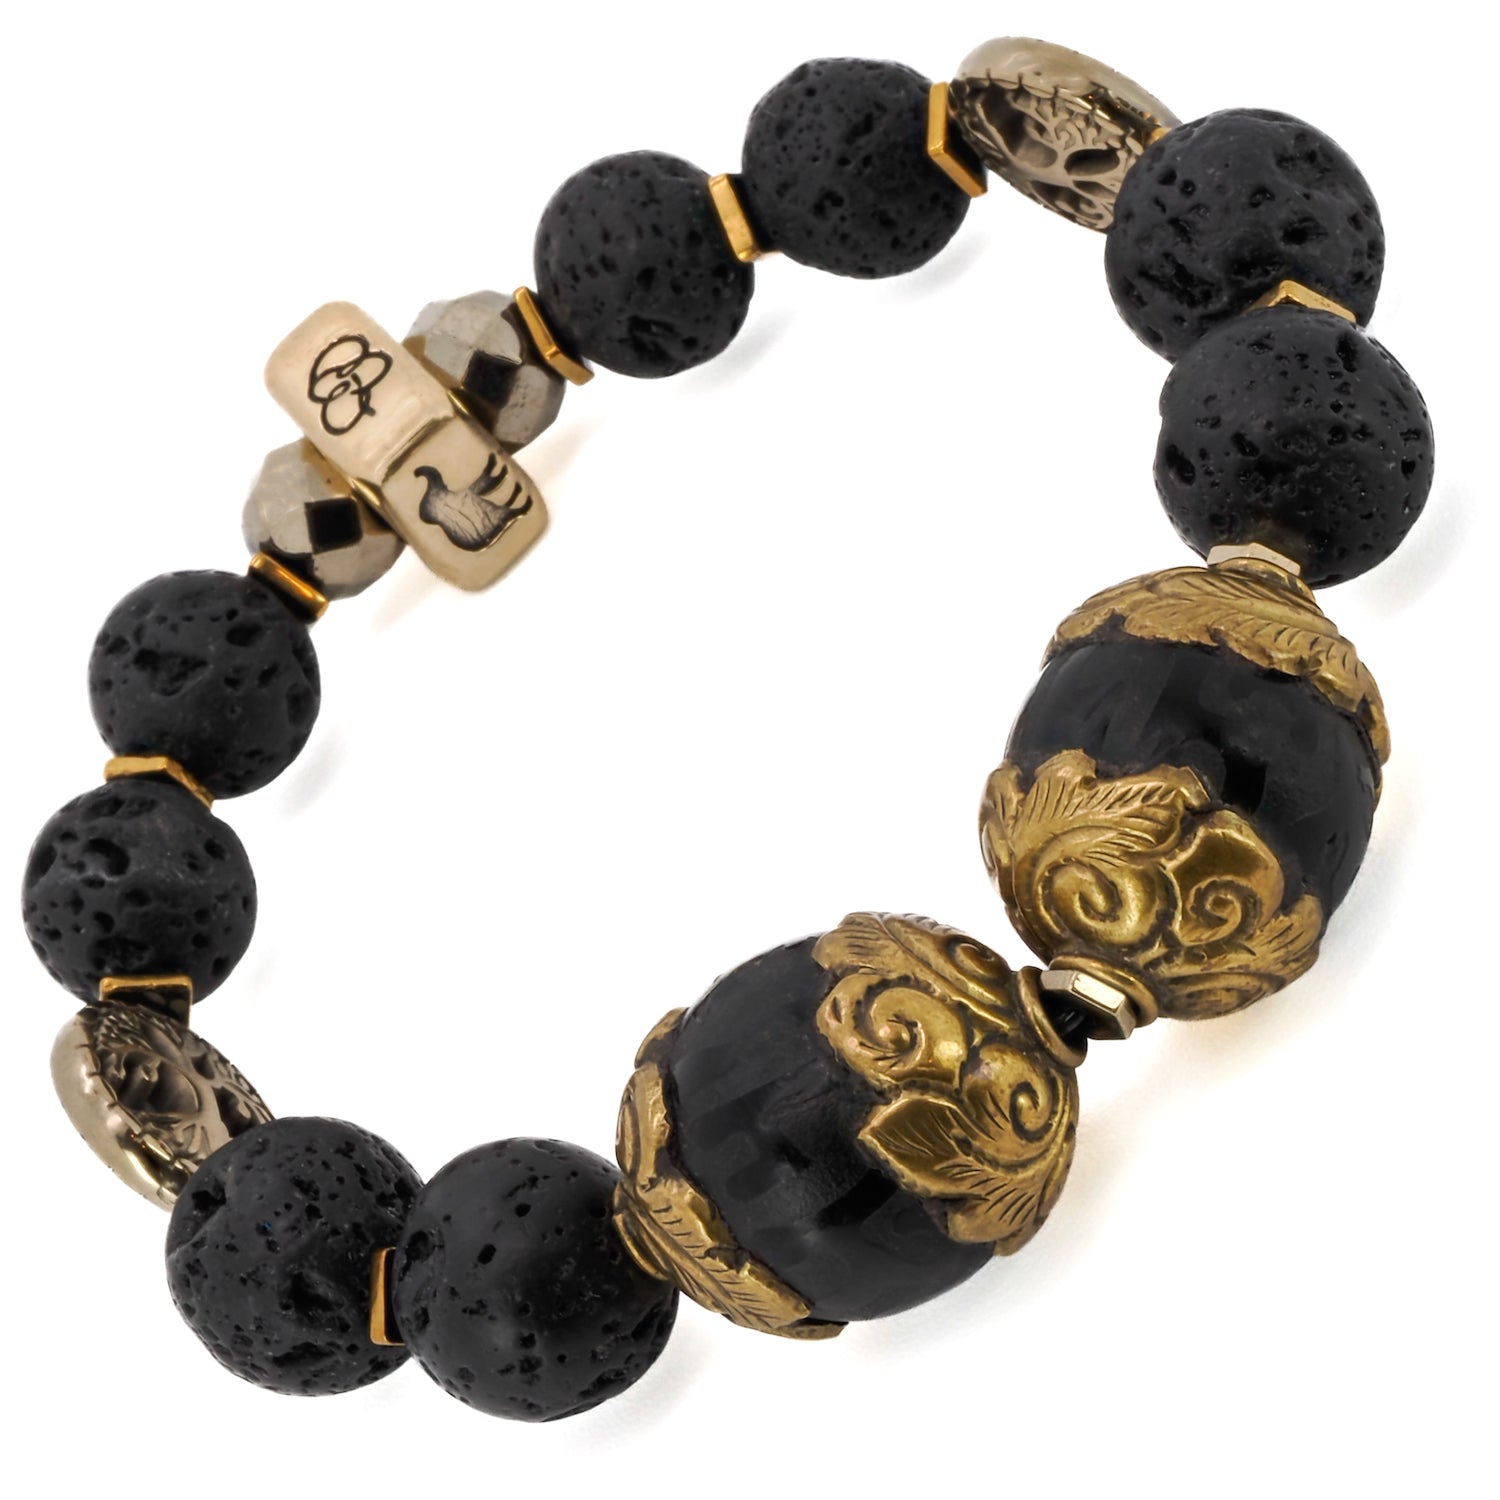 Protect yourself from negative energy with the Black Nepal Talisman Bracelet